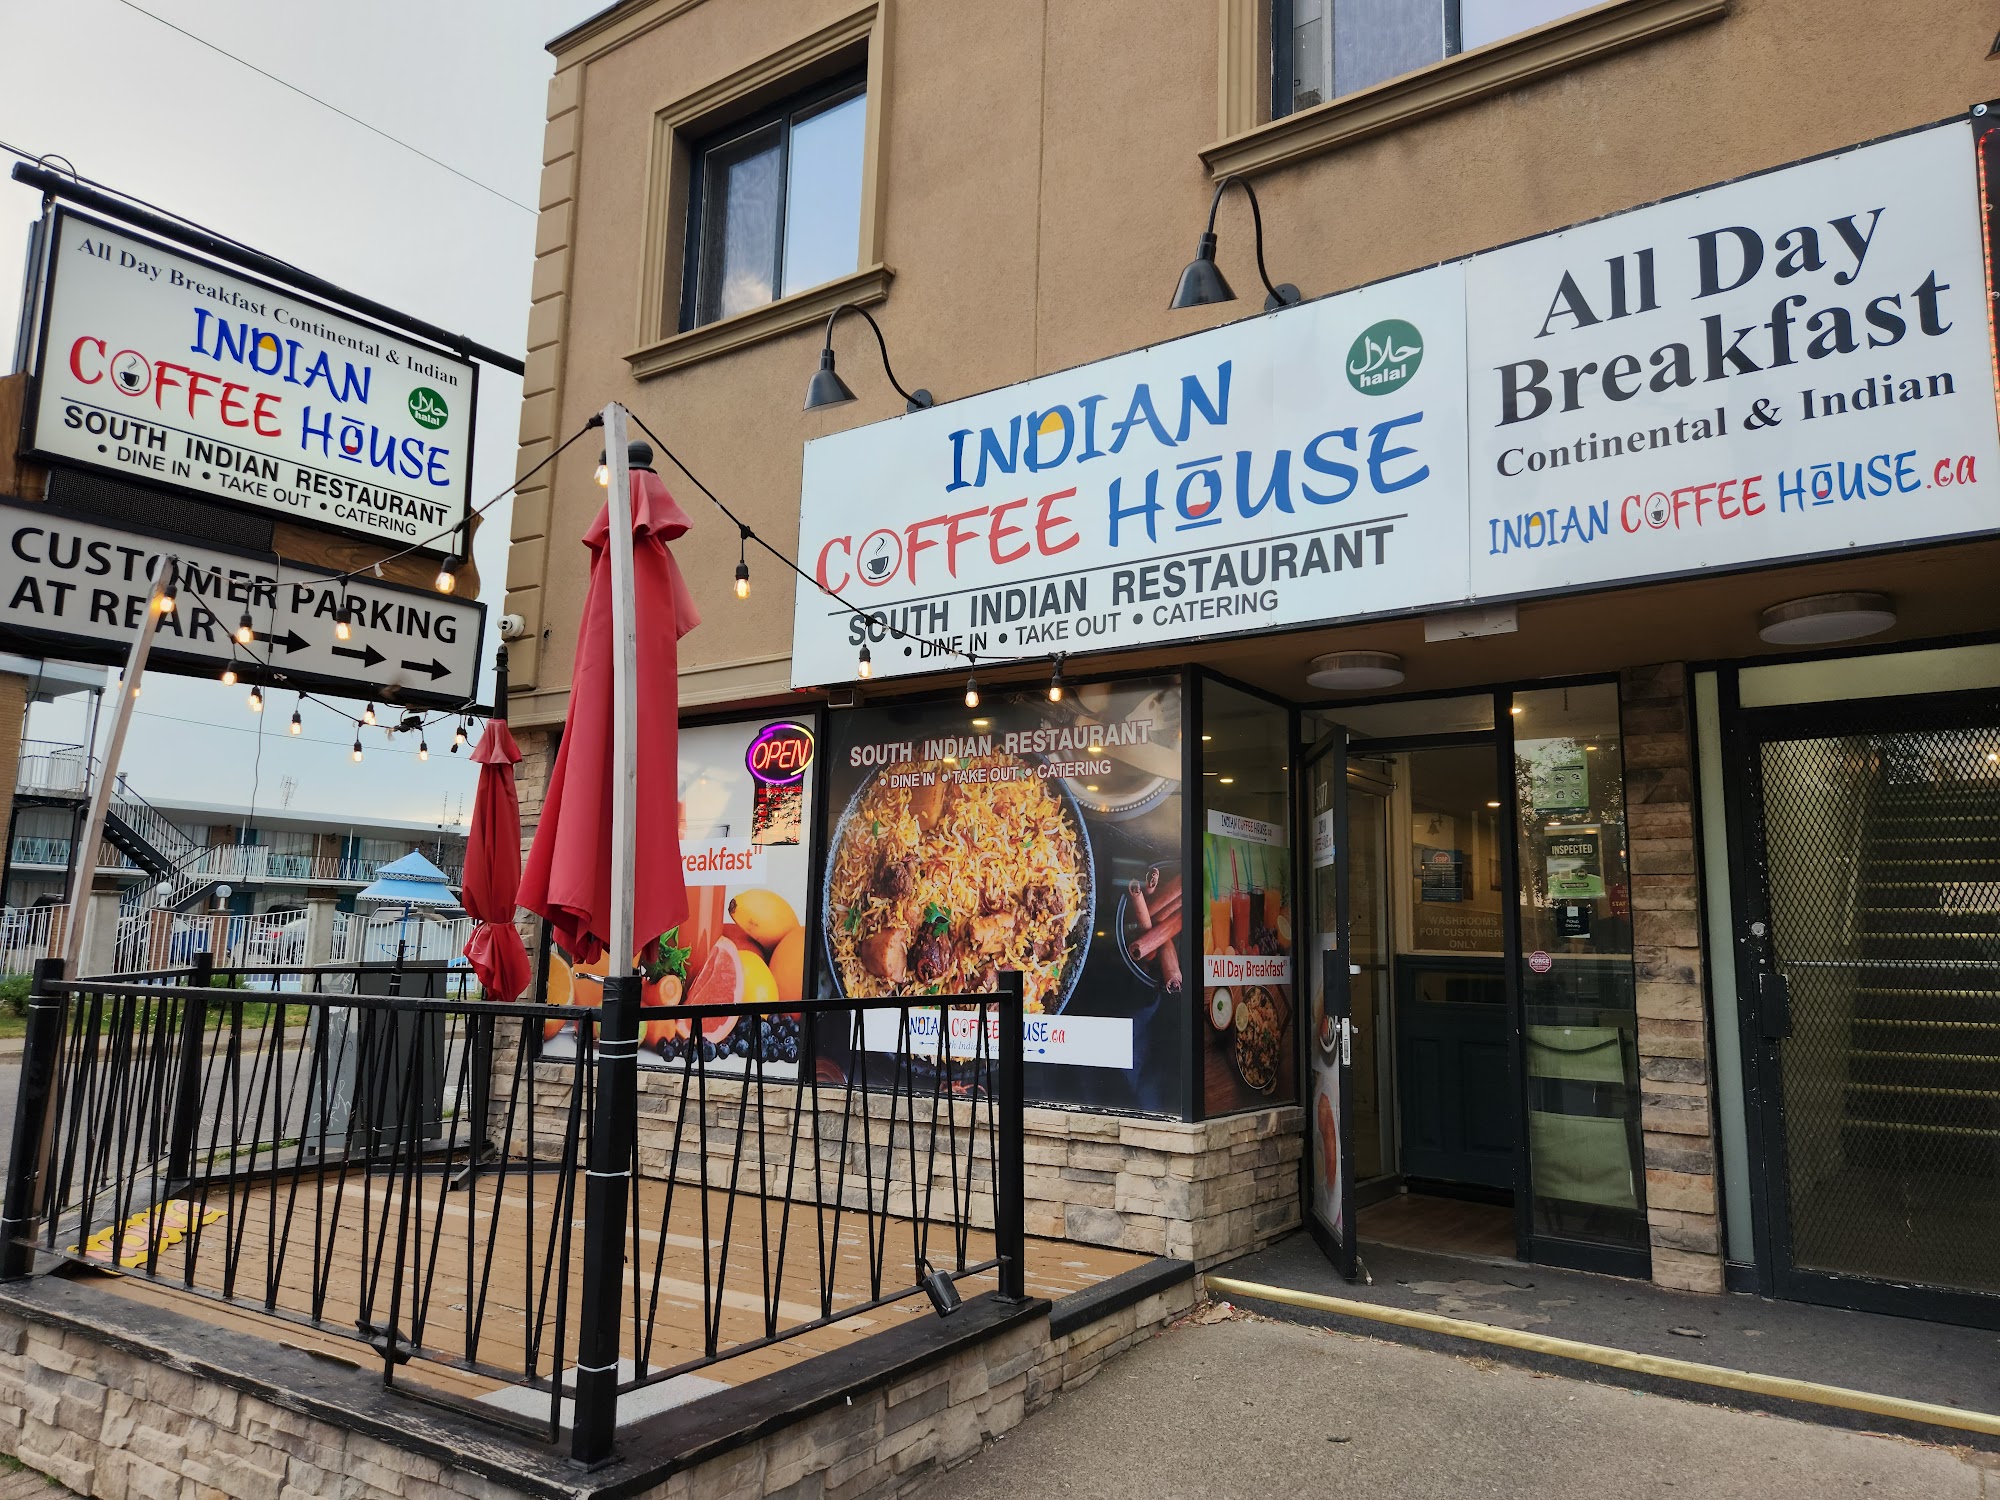 Indian Coffee House (Kerala South Indian Restaurant)